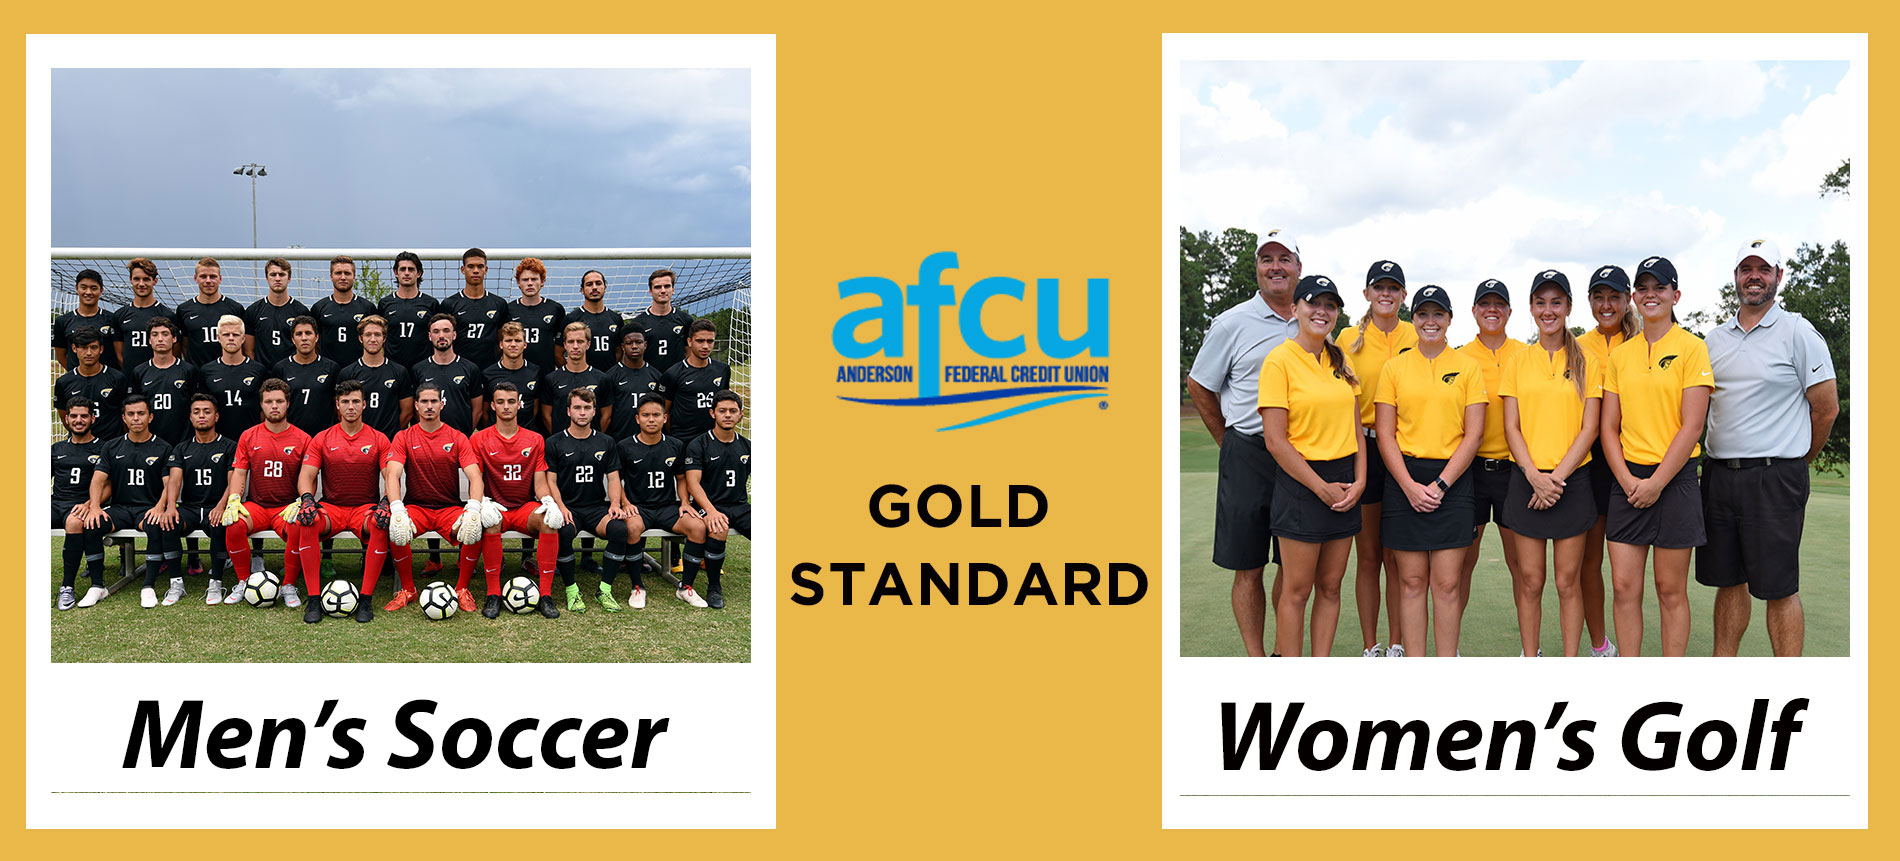 Women’s Golf Team and Men’s Soccer Team Named to the AFCU Gold Standard